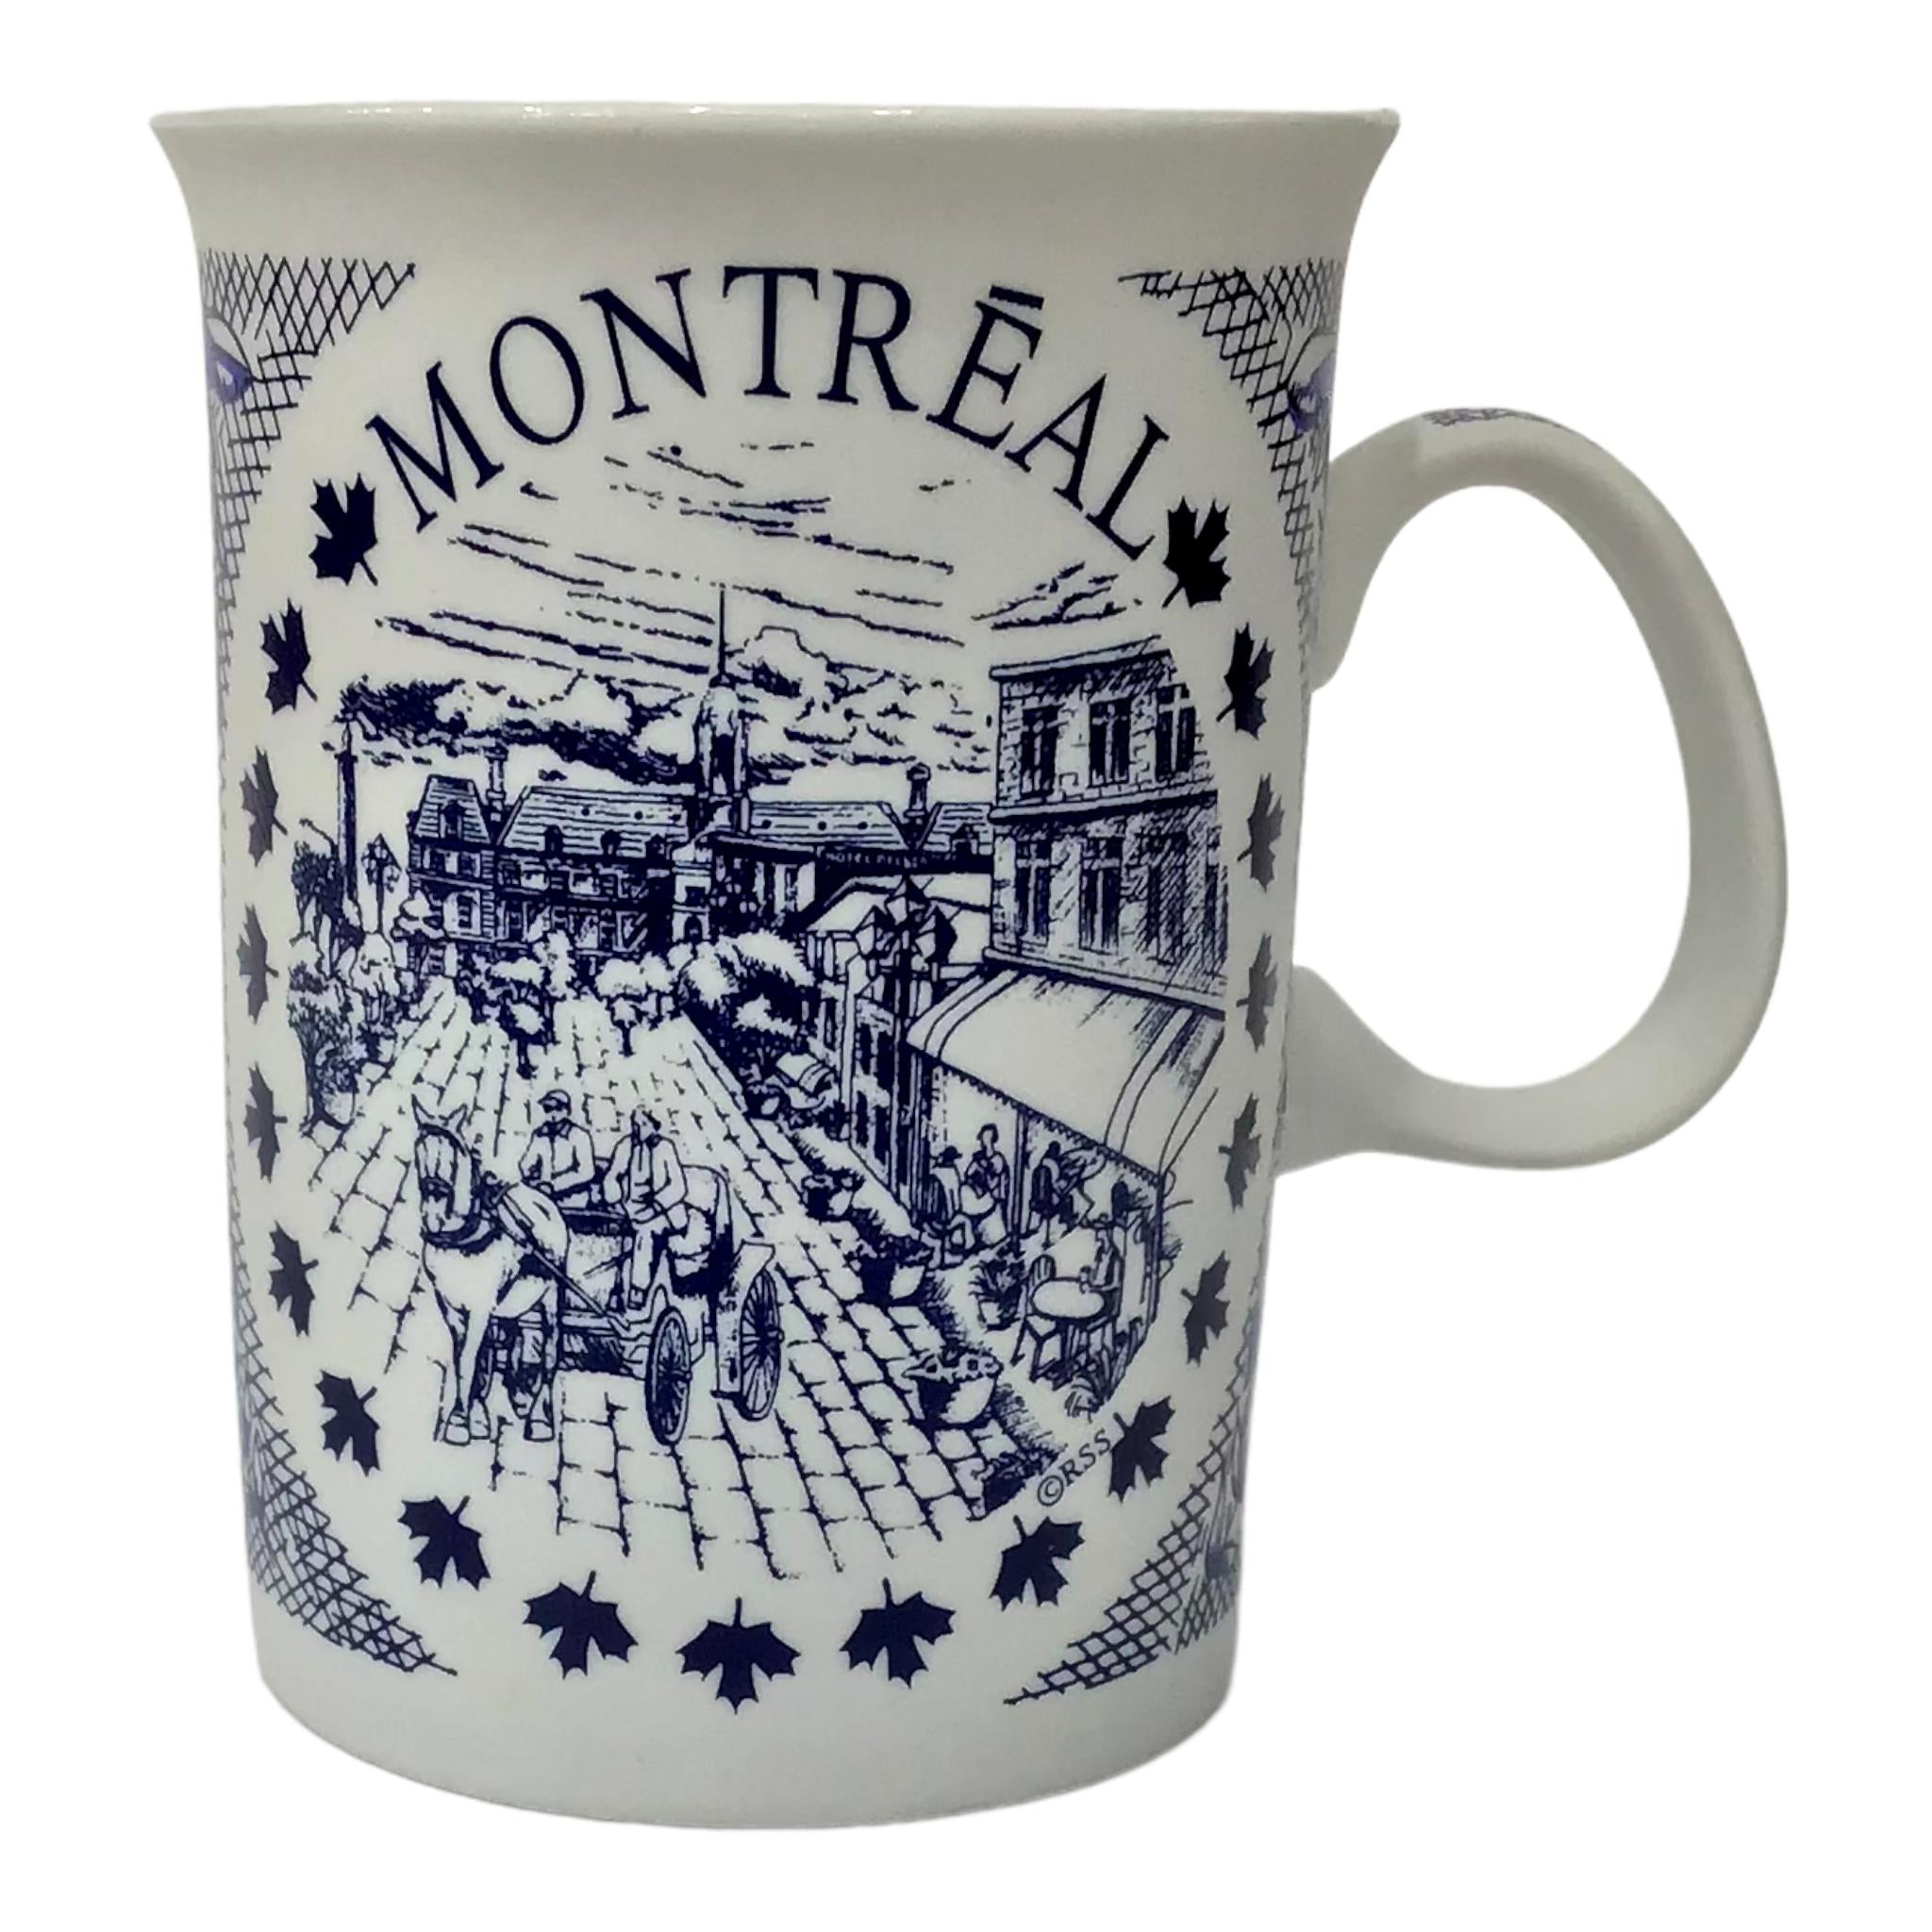 MUG MONTREAL SCENIC VINTAGE PRINT W/ HISTORY TEXT TEA CUP WHITE AND BLUE